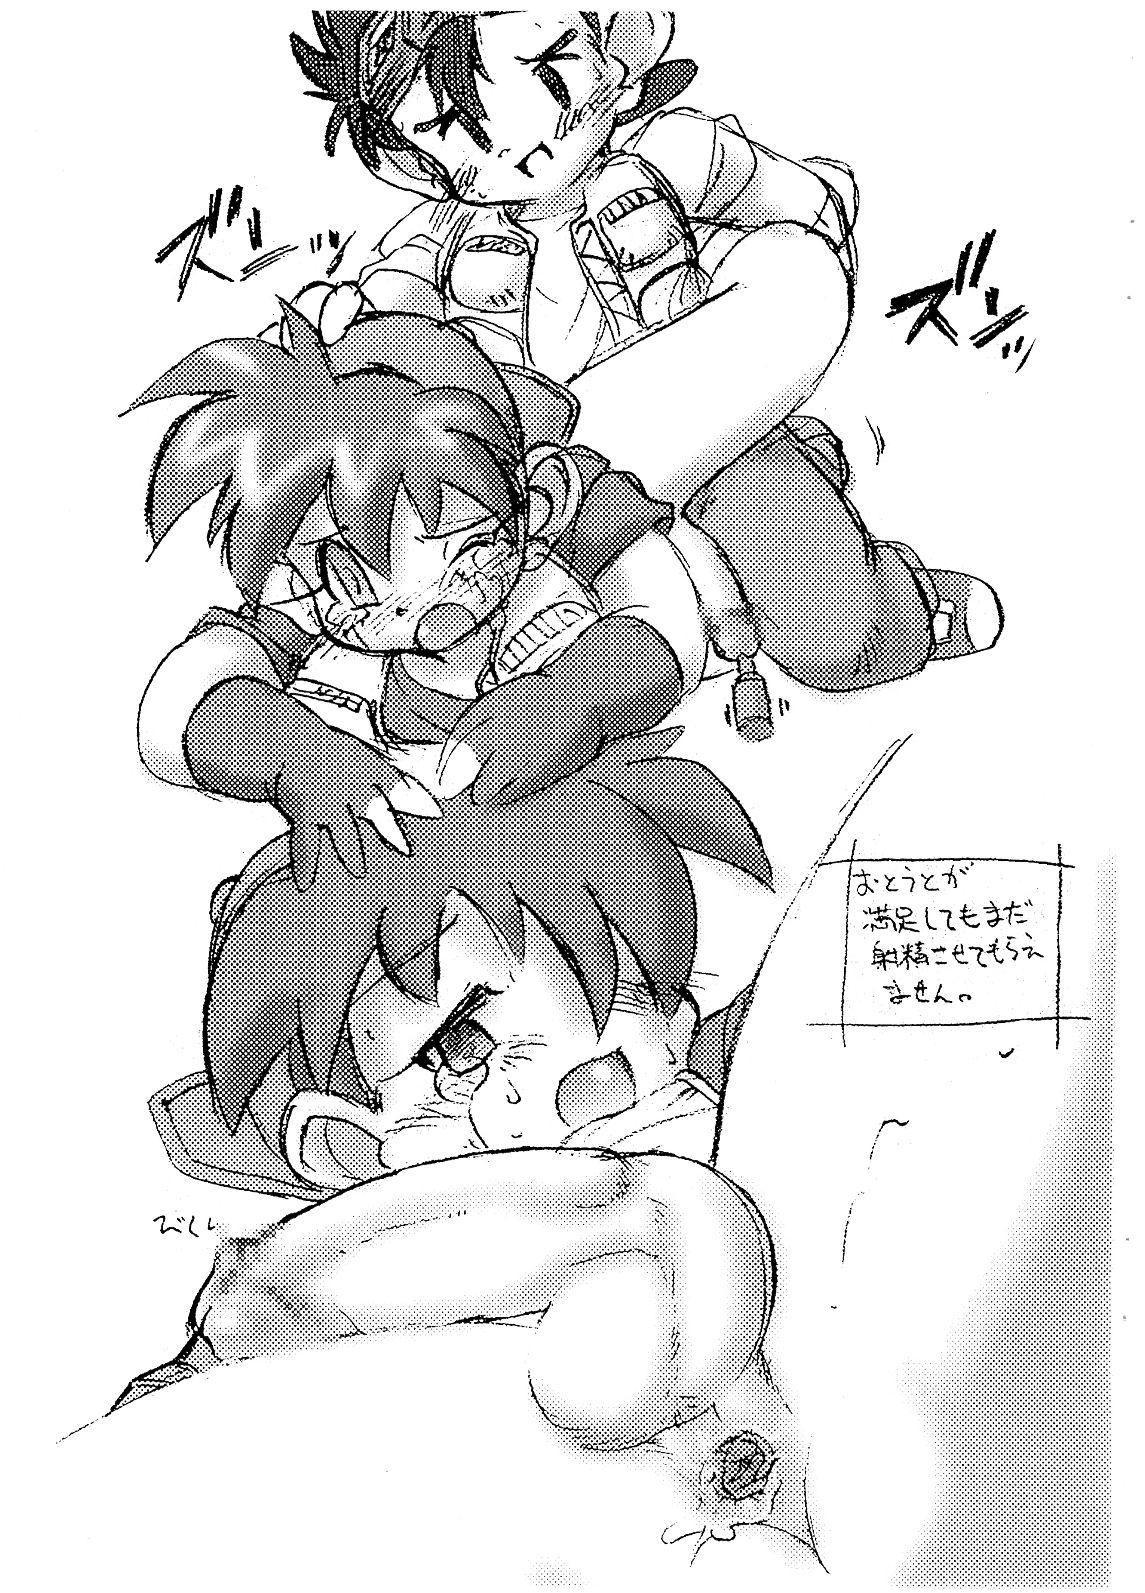 Climax TOUCH DASH! + Omake - The legend of zelda Bakusou kyoudai lets and go Abg - Page 4